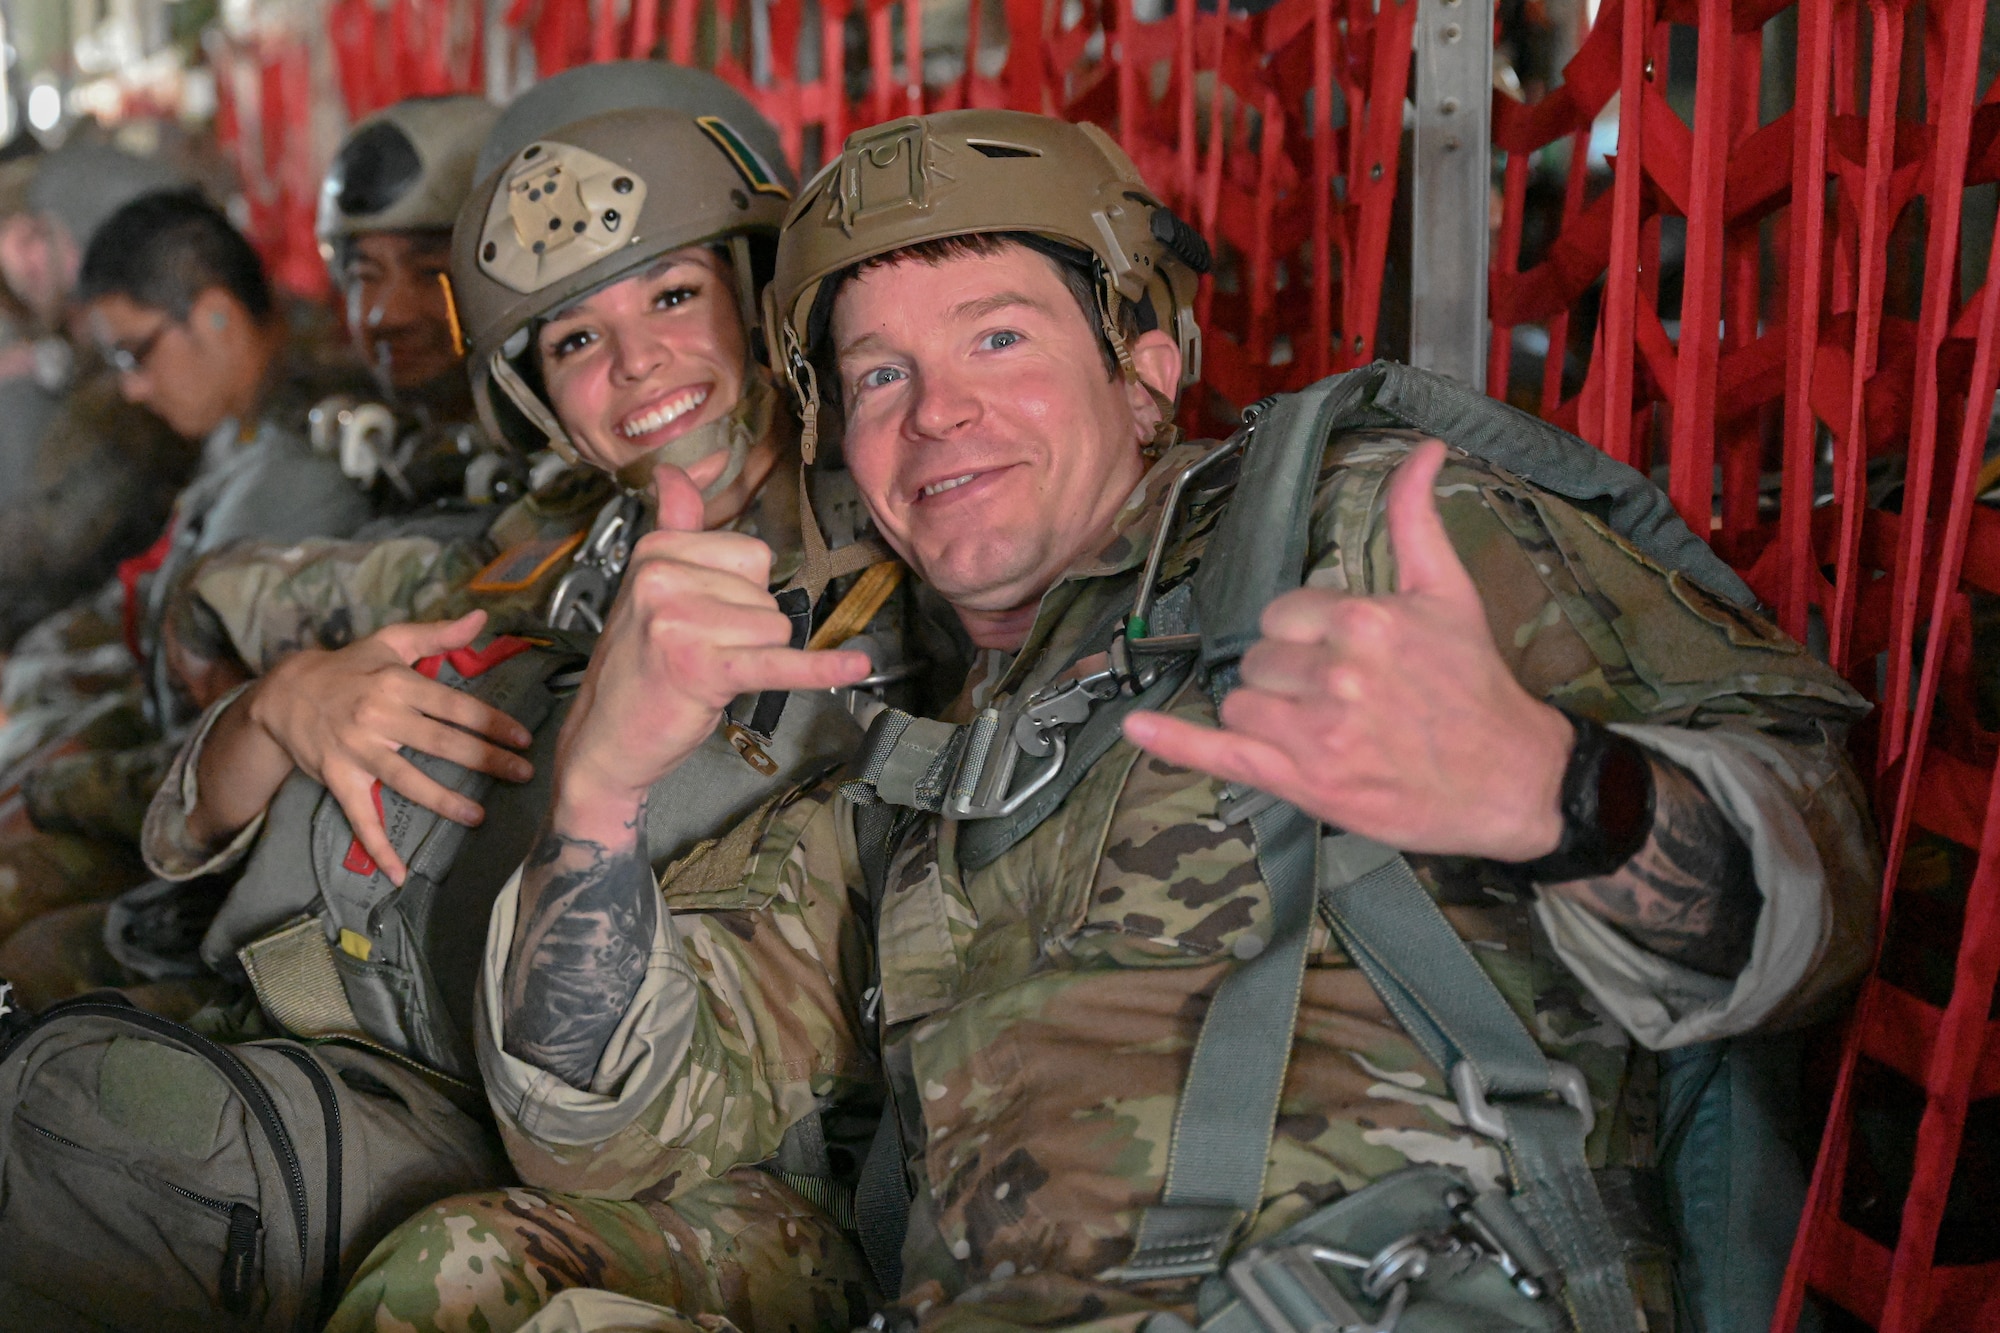 Paratroopers pose for a photo.